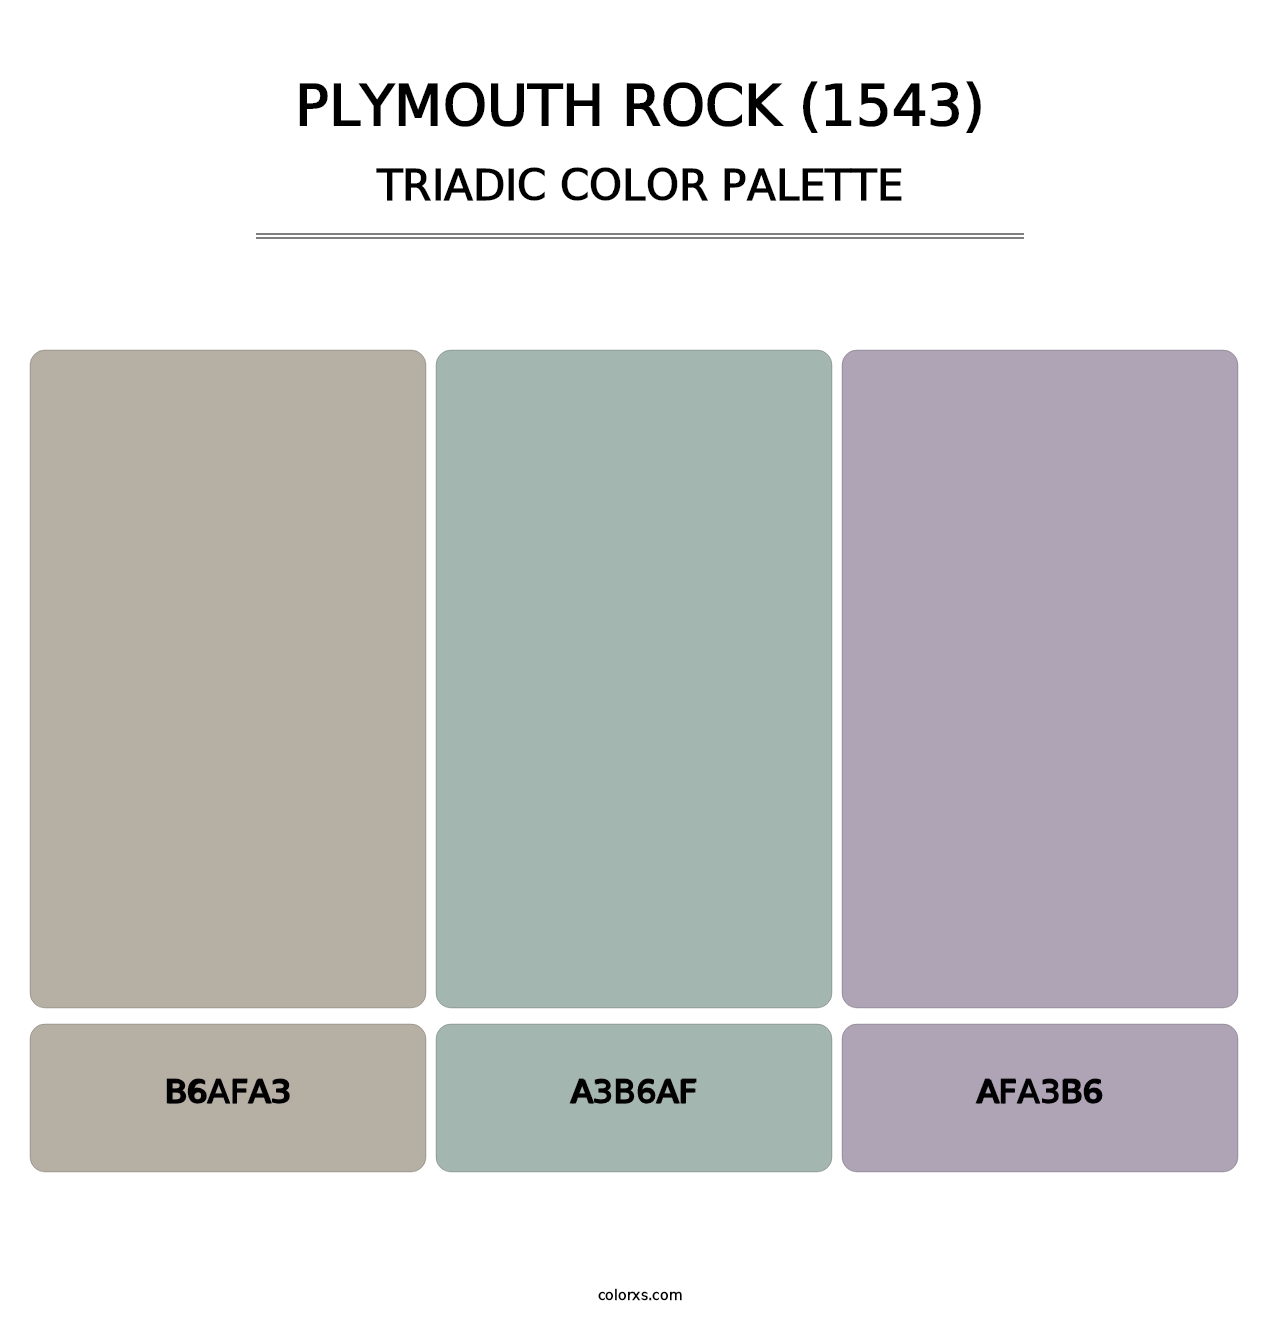 Plymouth Rock (1543) - Triadic Color Palette